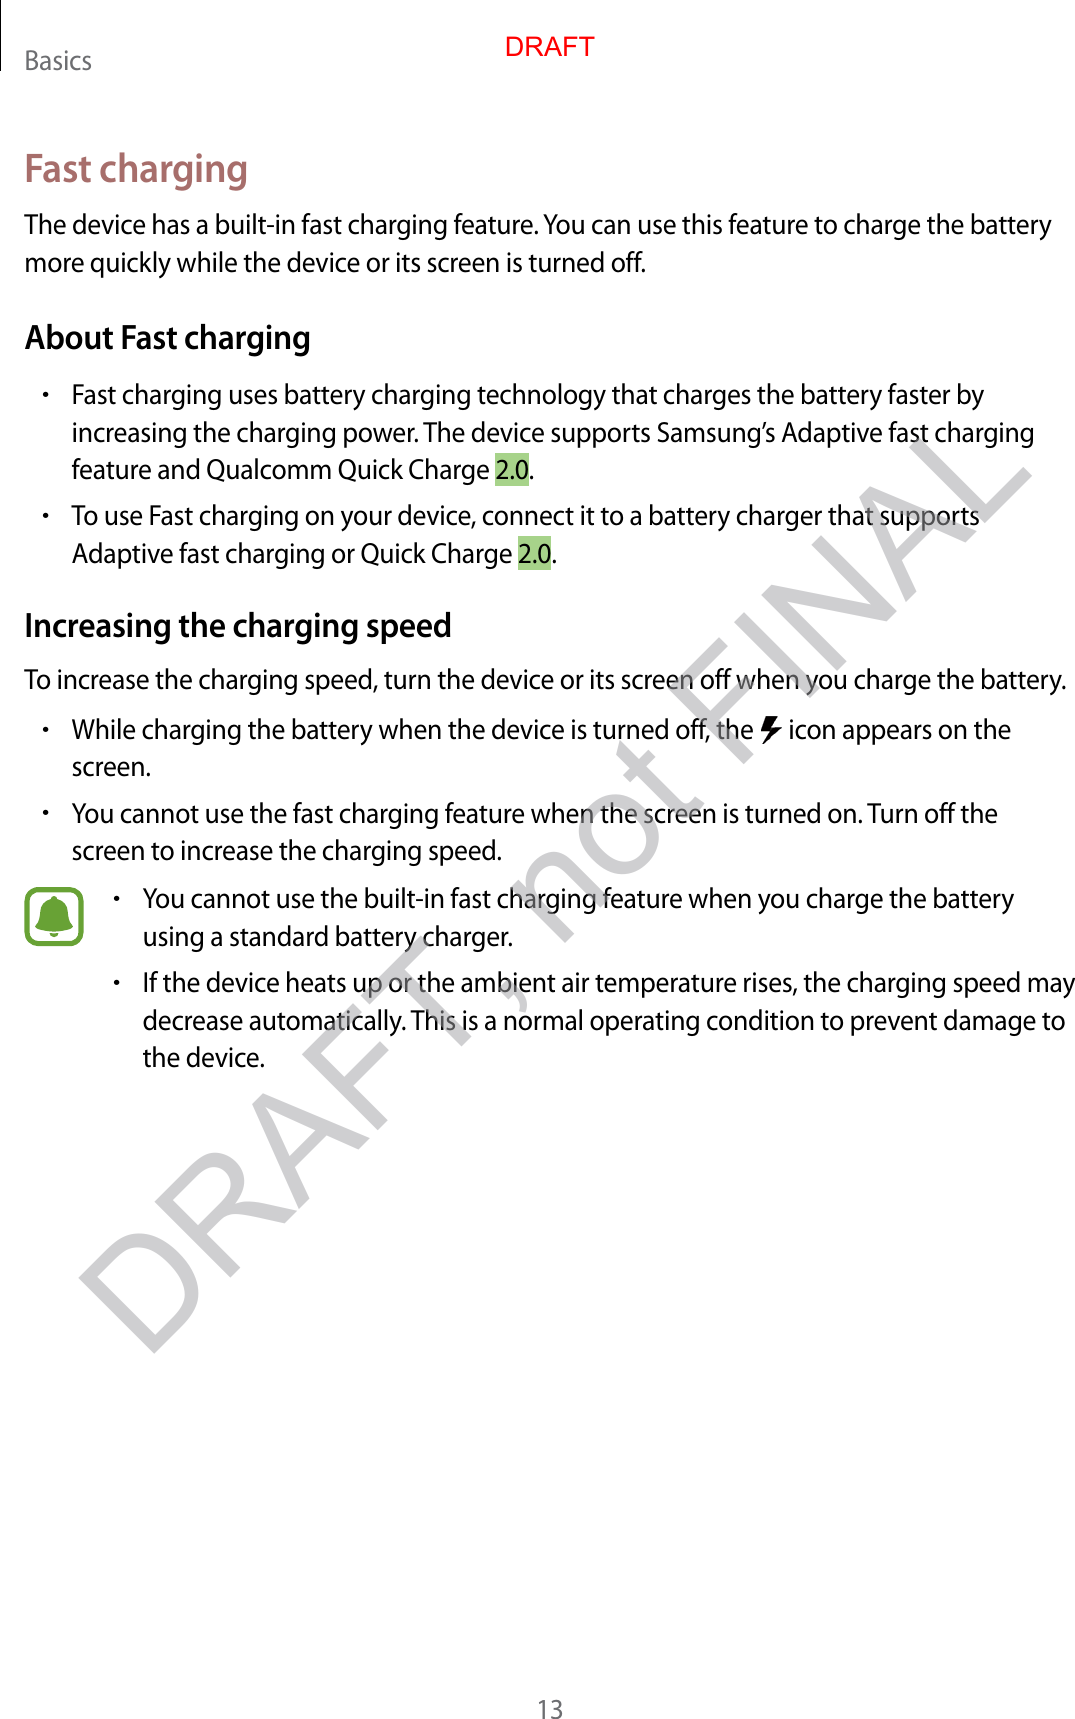 Basics13Fast chargingThe device has a built-in fast charging feature. You can use this feature to charge the battery more quickly while the device or its screen is turned off.About Fast charging•Fast charging uses battery charging technology that charges the battery faster by increasing the charging power. The device supports Samsung’s Adaptive fast charging feature and Qualcomm Quick Charge 2.0.•To use Fast charging on your device, connect it to a battery charger that supports Adaptive fast charging or Quick Charge 2.0.Increasing the charging speedTo increase the charging speed, turn the device or its screen off when you charge the battery.•While charging the battery when the device is turned off, the   icon appears on the screen.•You cannot use the fast charging feature when the screen is turned on. Turn off the screen to increase the charging speed.•You cannot use the built-in fast charging feature when you charge the battery using a standard battery charger.•If the device heats up or the ambient air temperature rises, the charging speed may decrease automatically. This is a normal operating condition to prevent damage to the device.DRAFTDRAFT, not FINAL